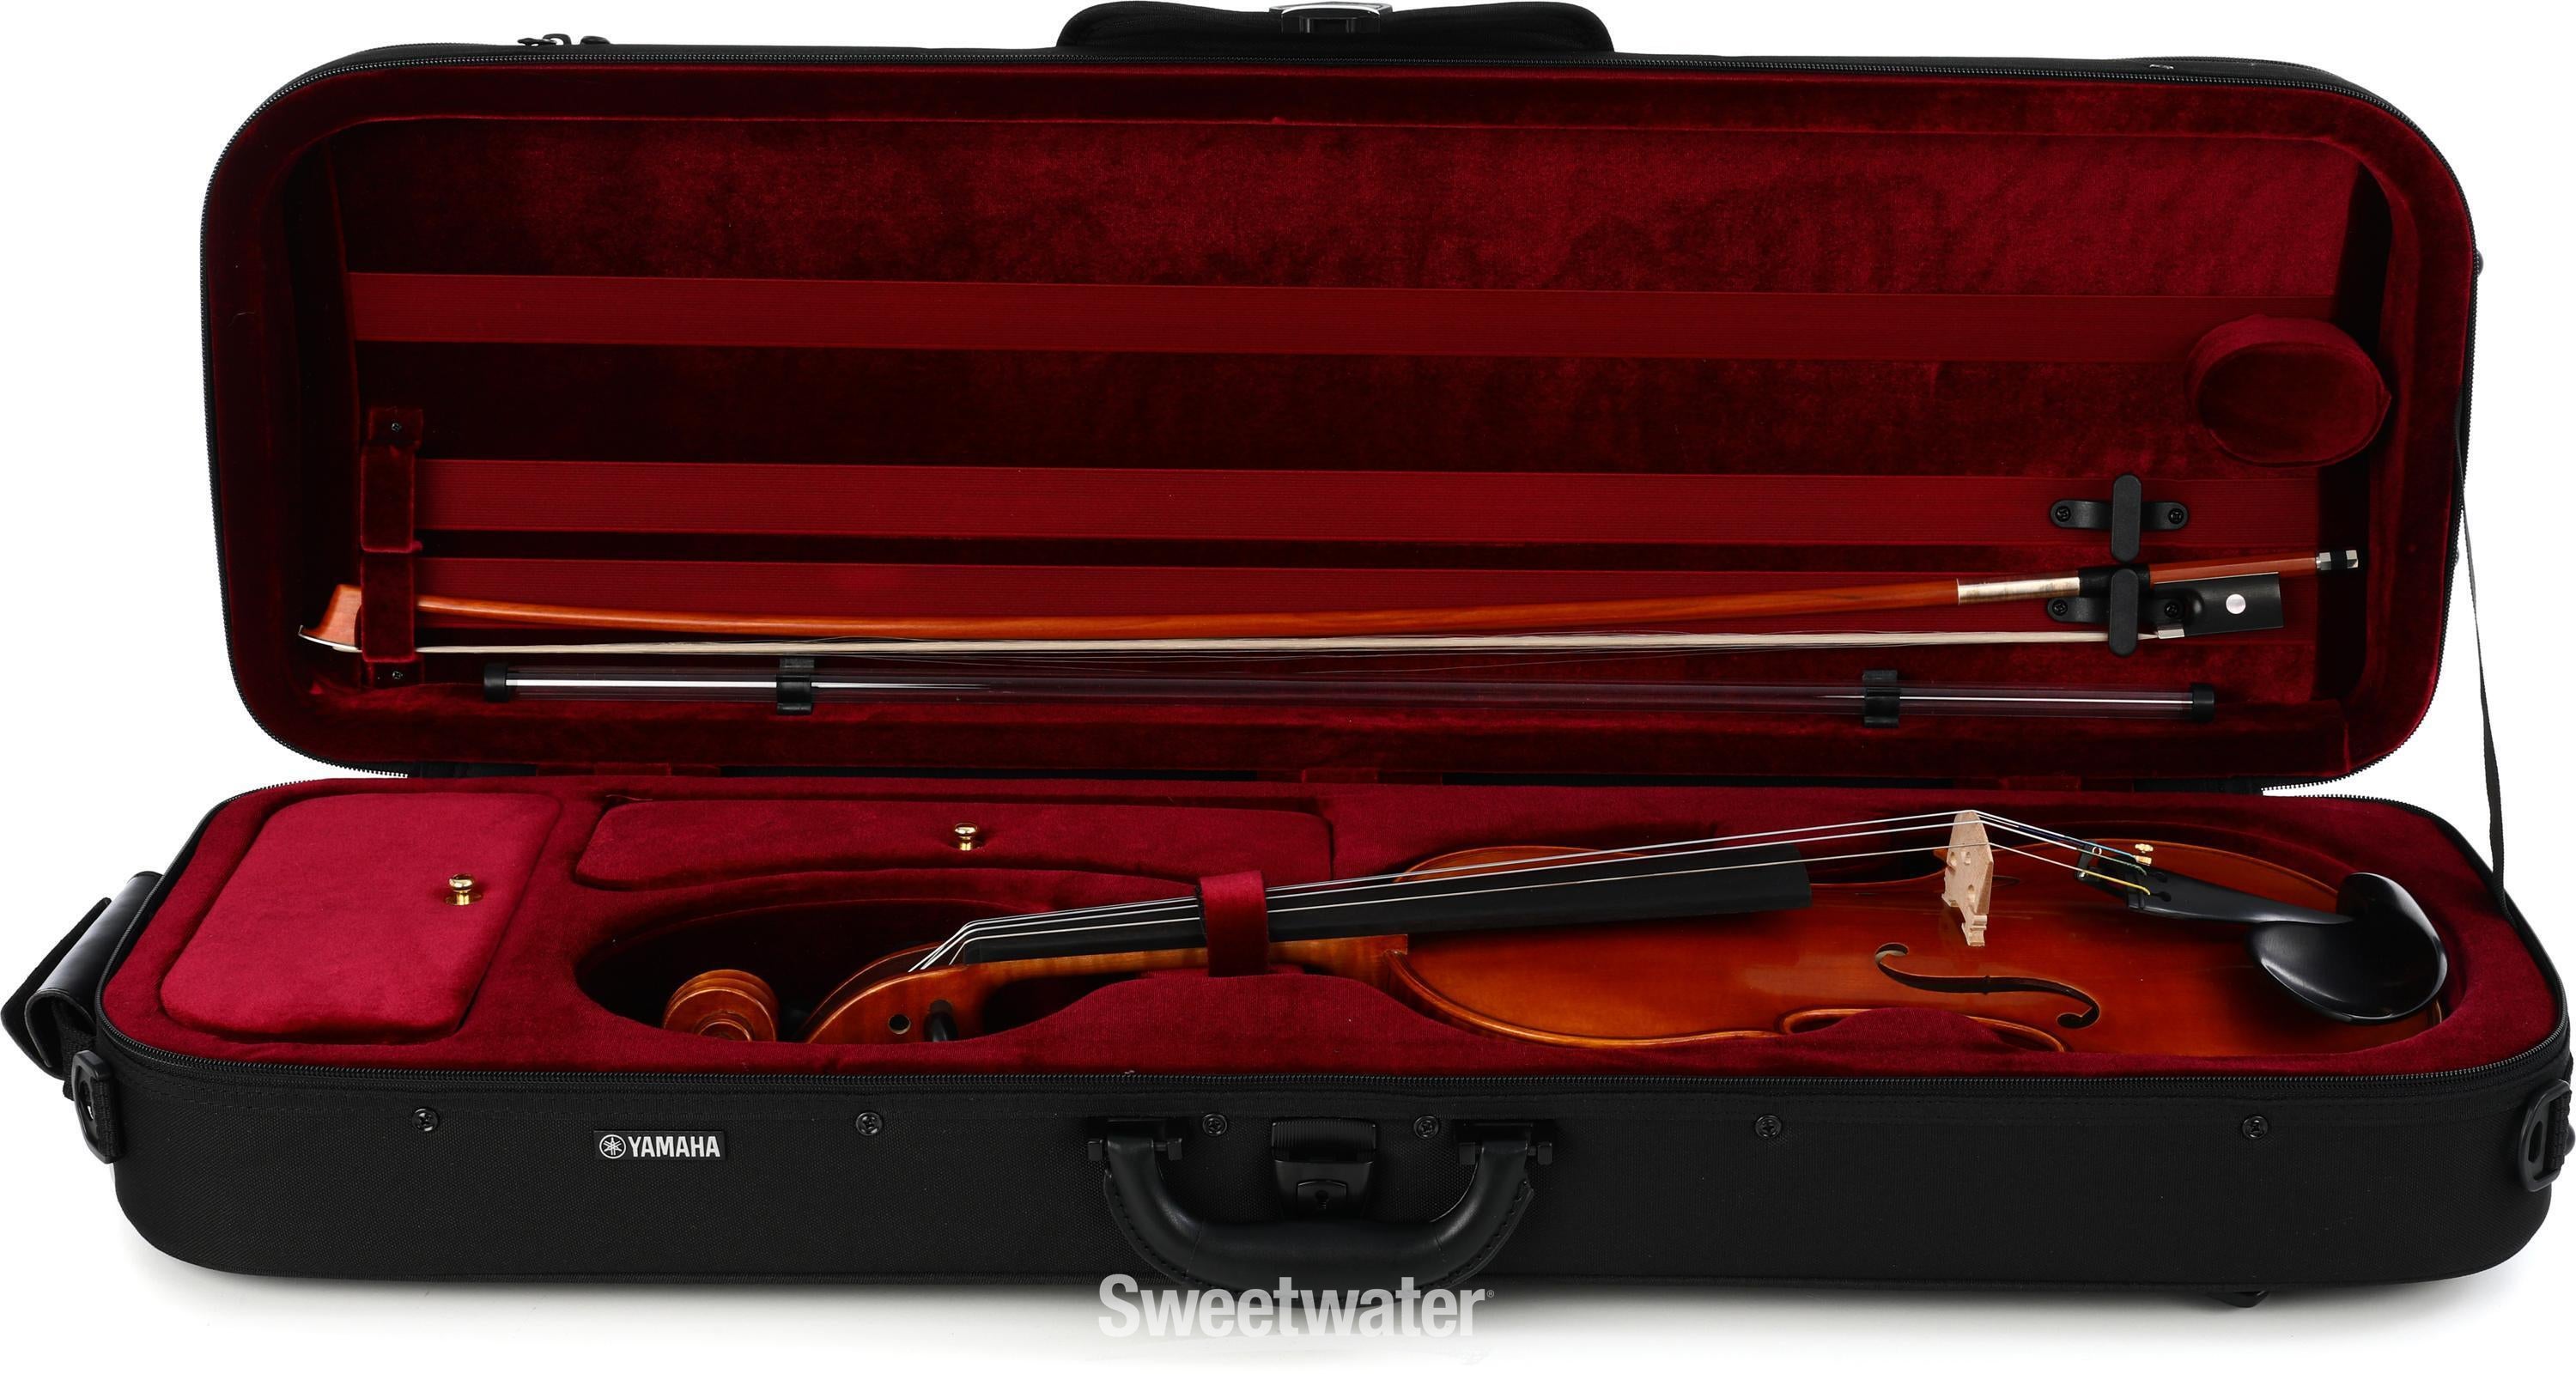 Yamaha AV10-44SG 4/4 Size Intermediate Violin Outfit | Sweetwater